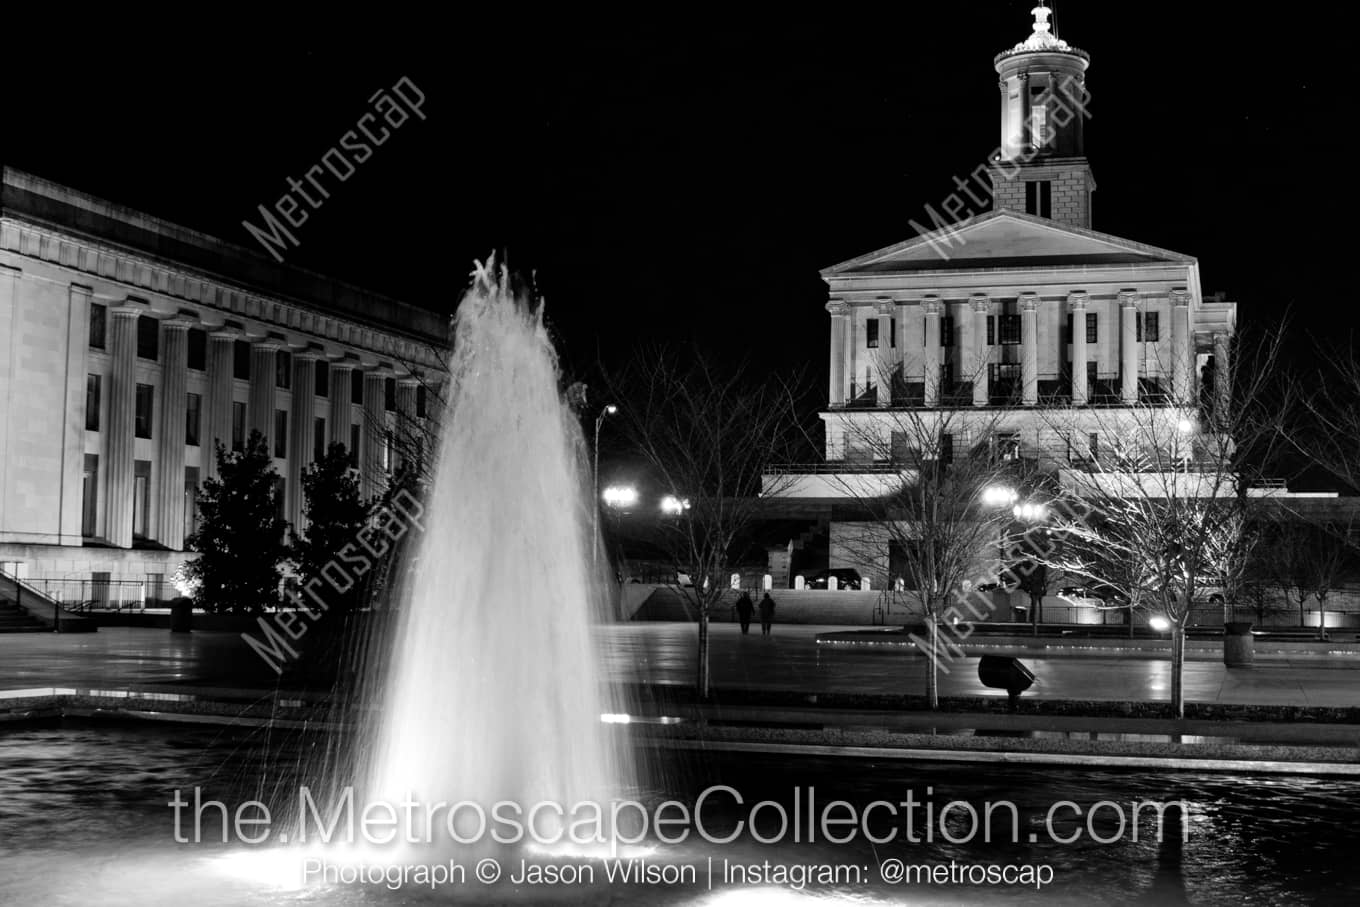 Nashville Tennessee Picture at Night